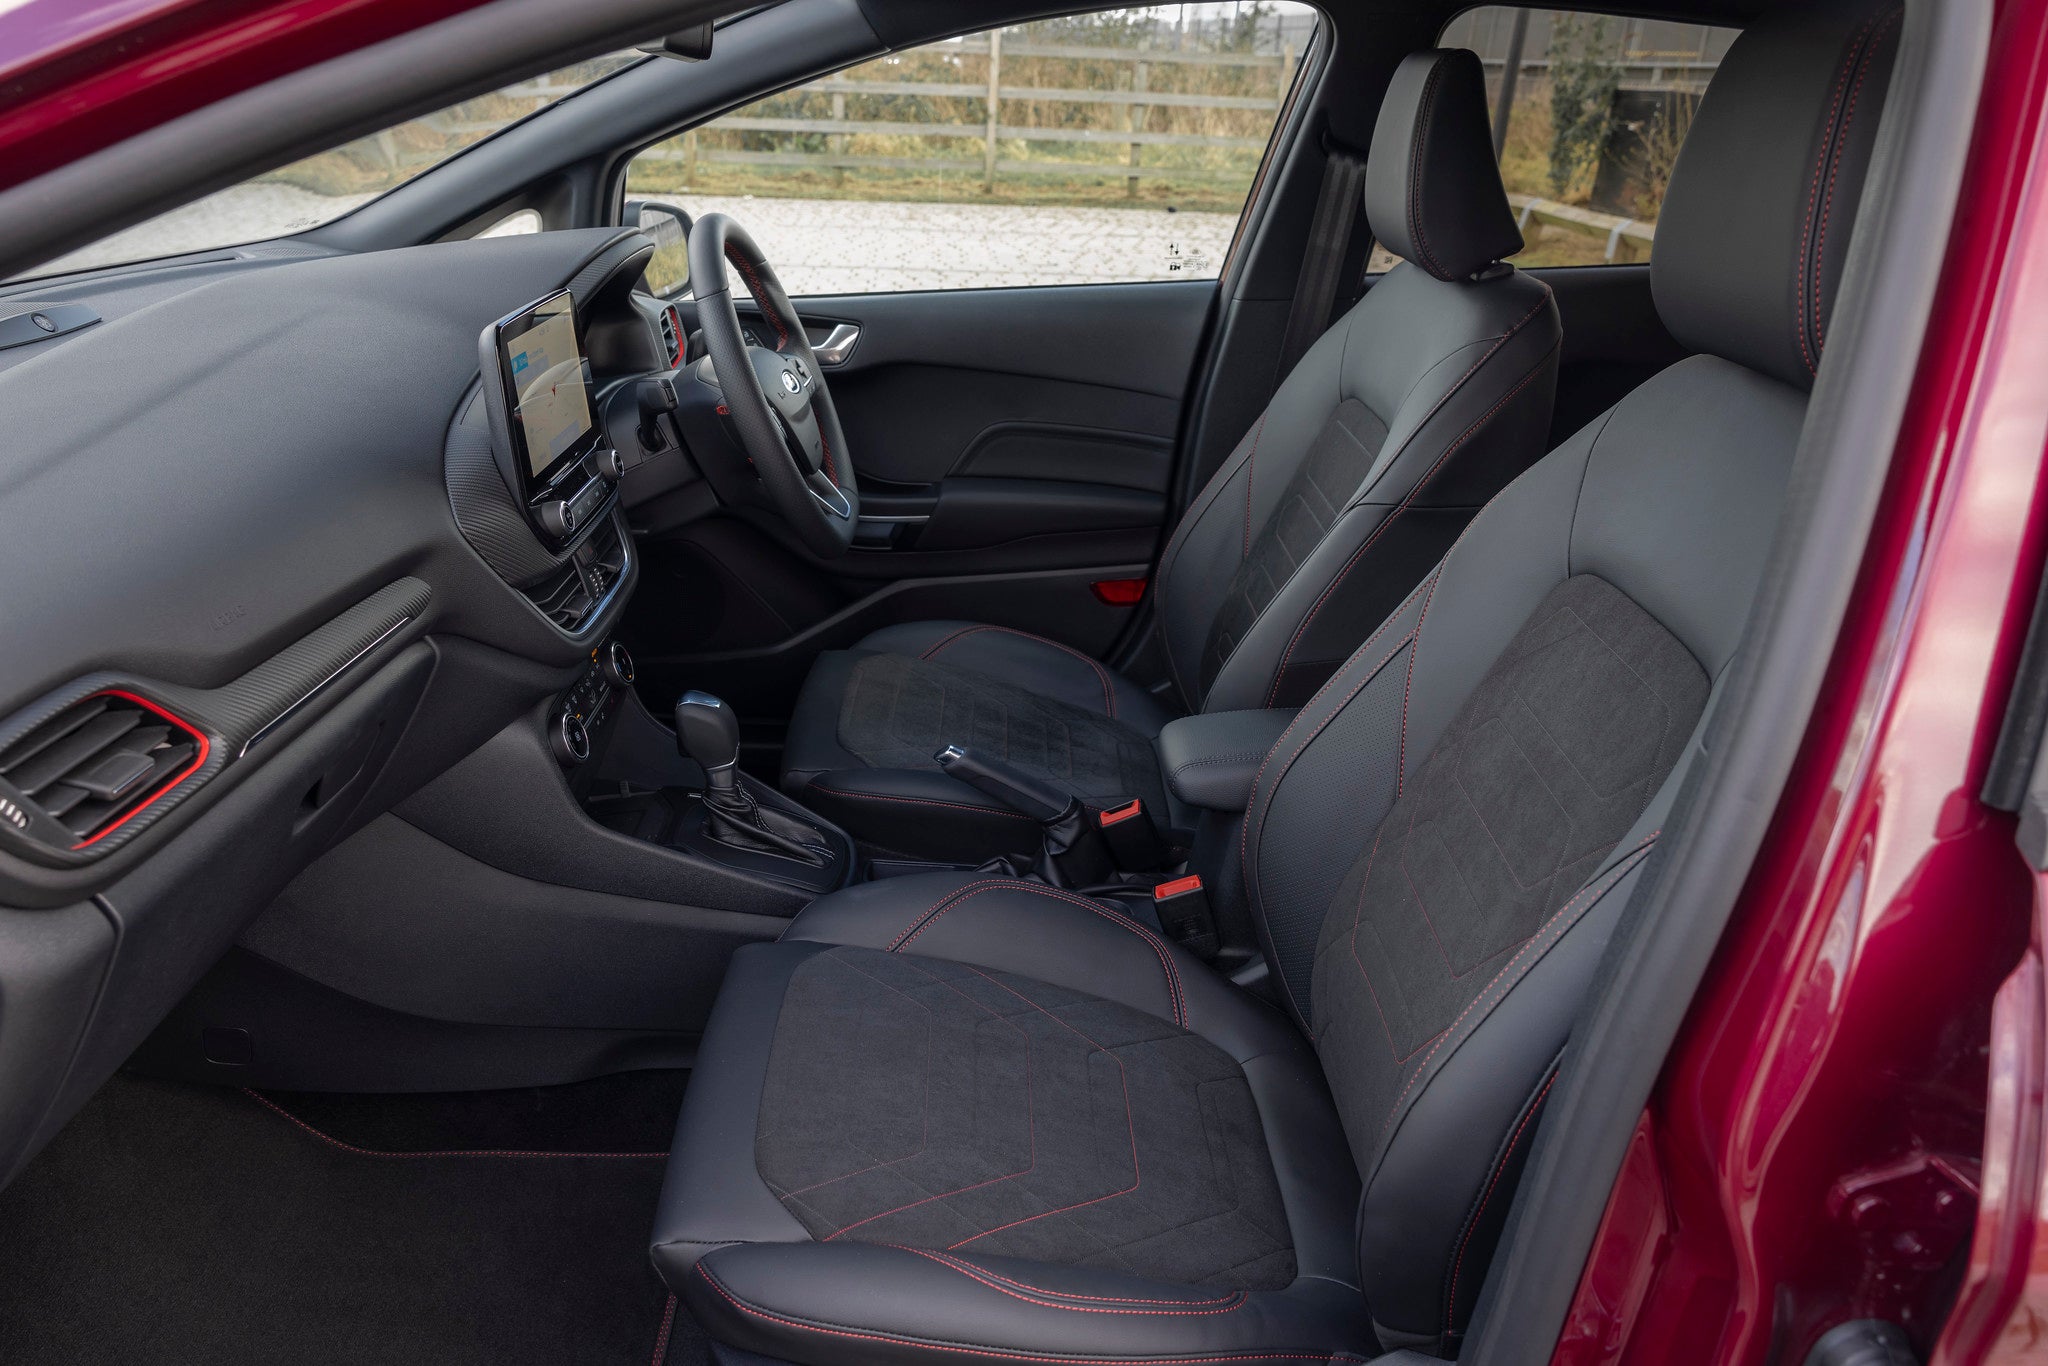 Ford Fiesta front seats from side